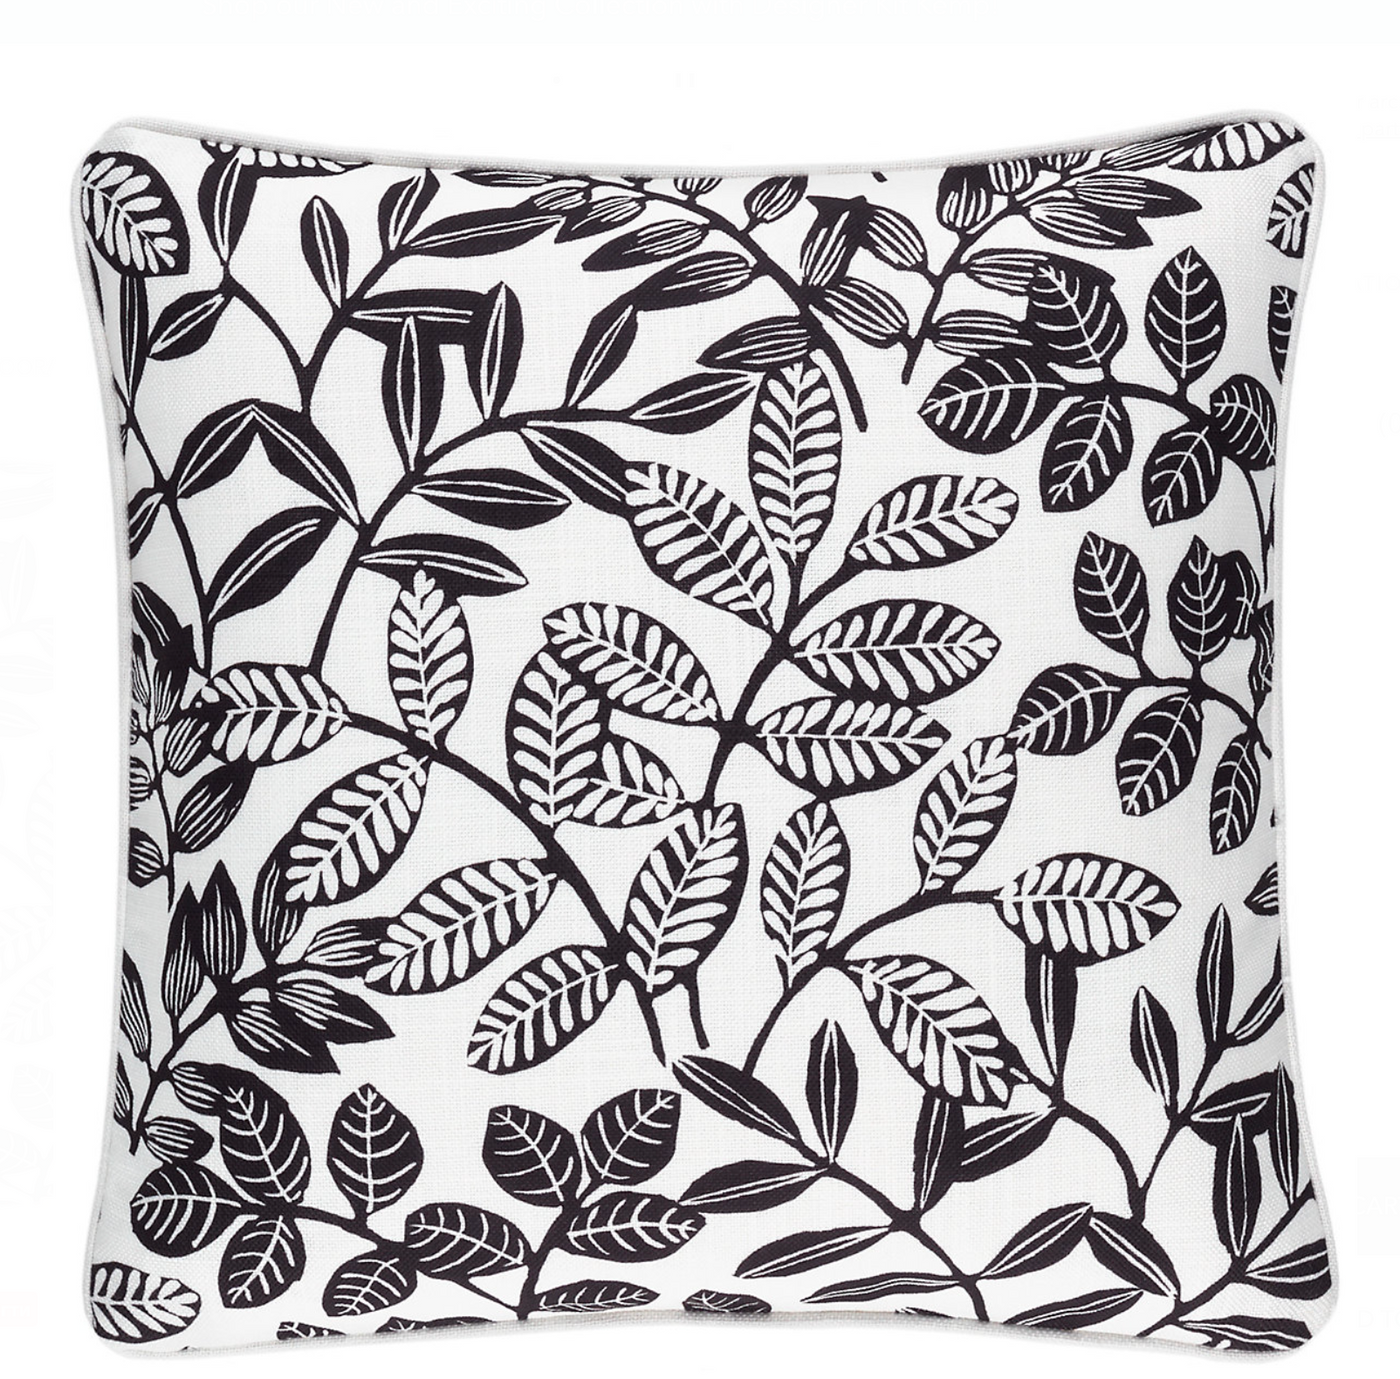 PILLOW DECORATIVE INDOOR/OUTDOOR IVORY BLACK LEAVES